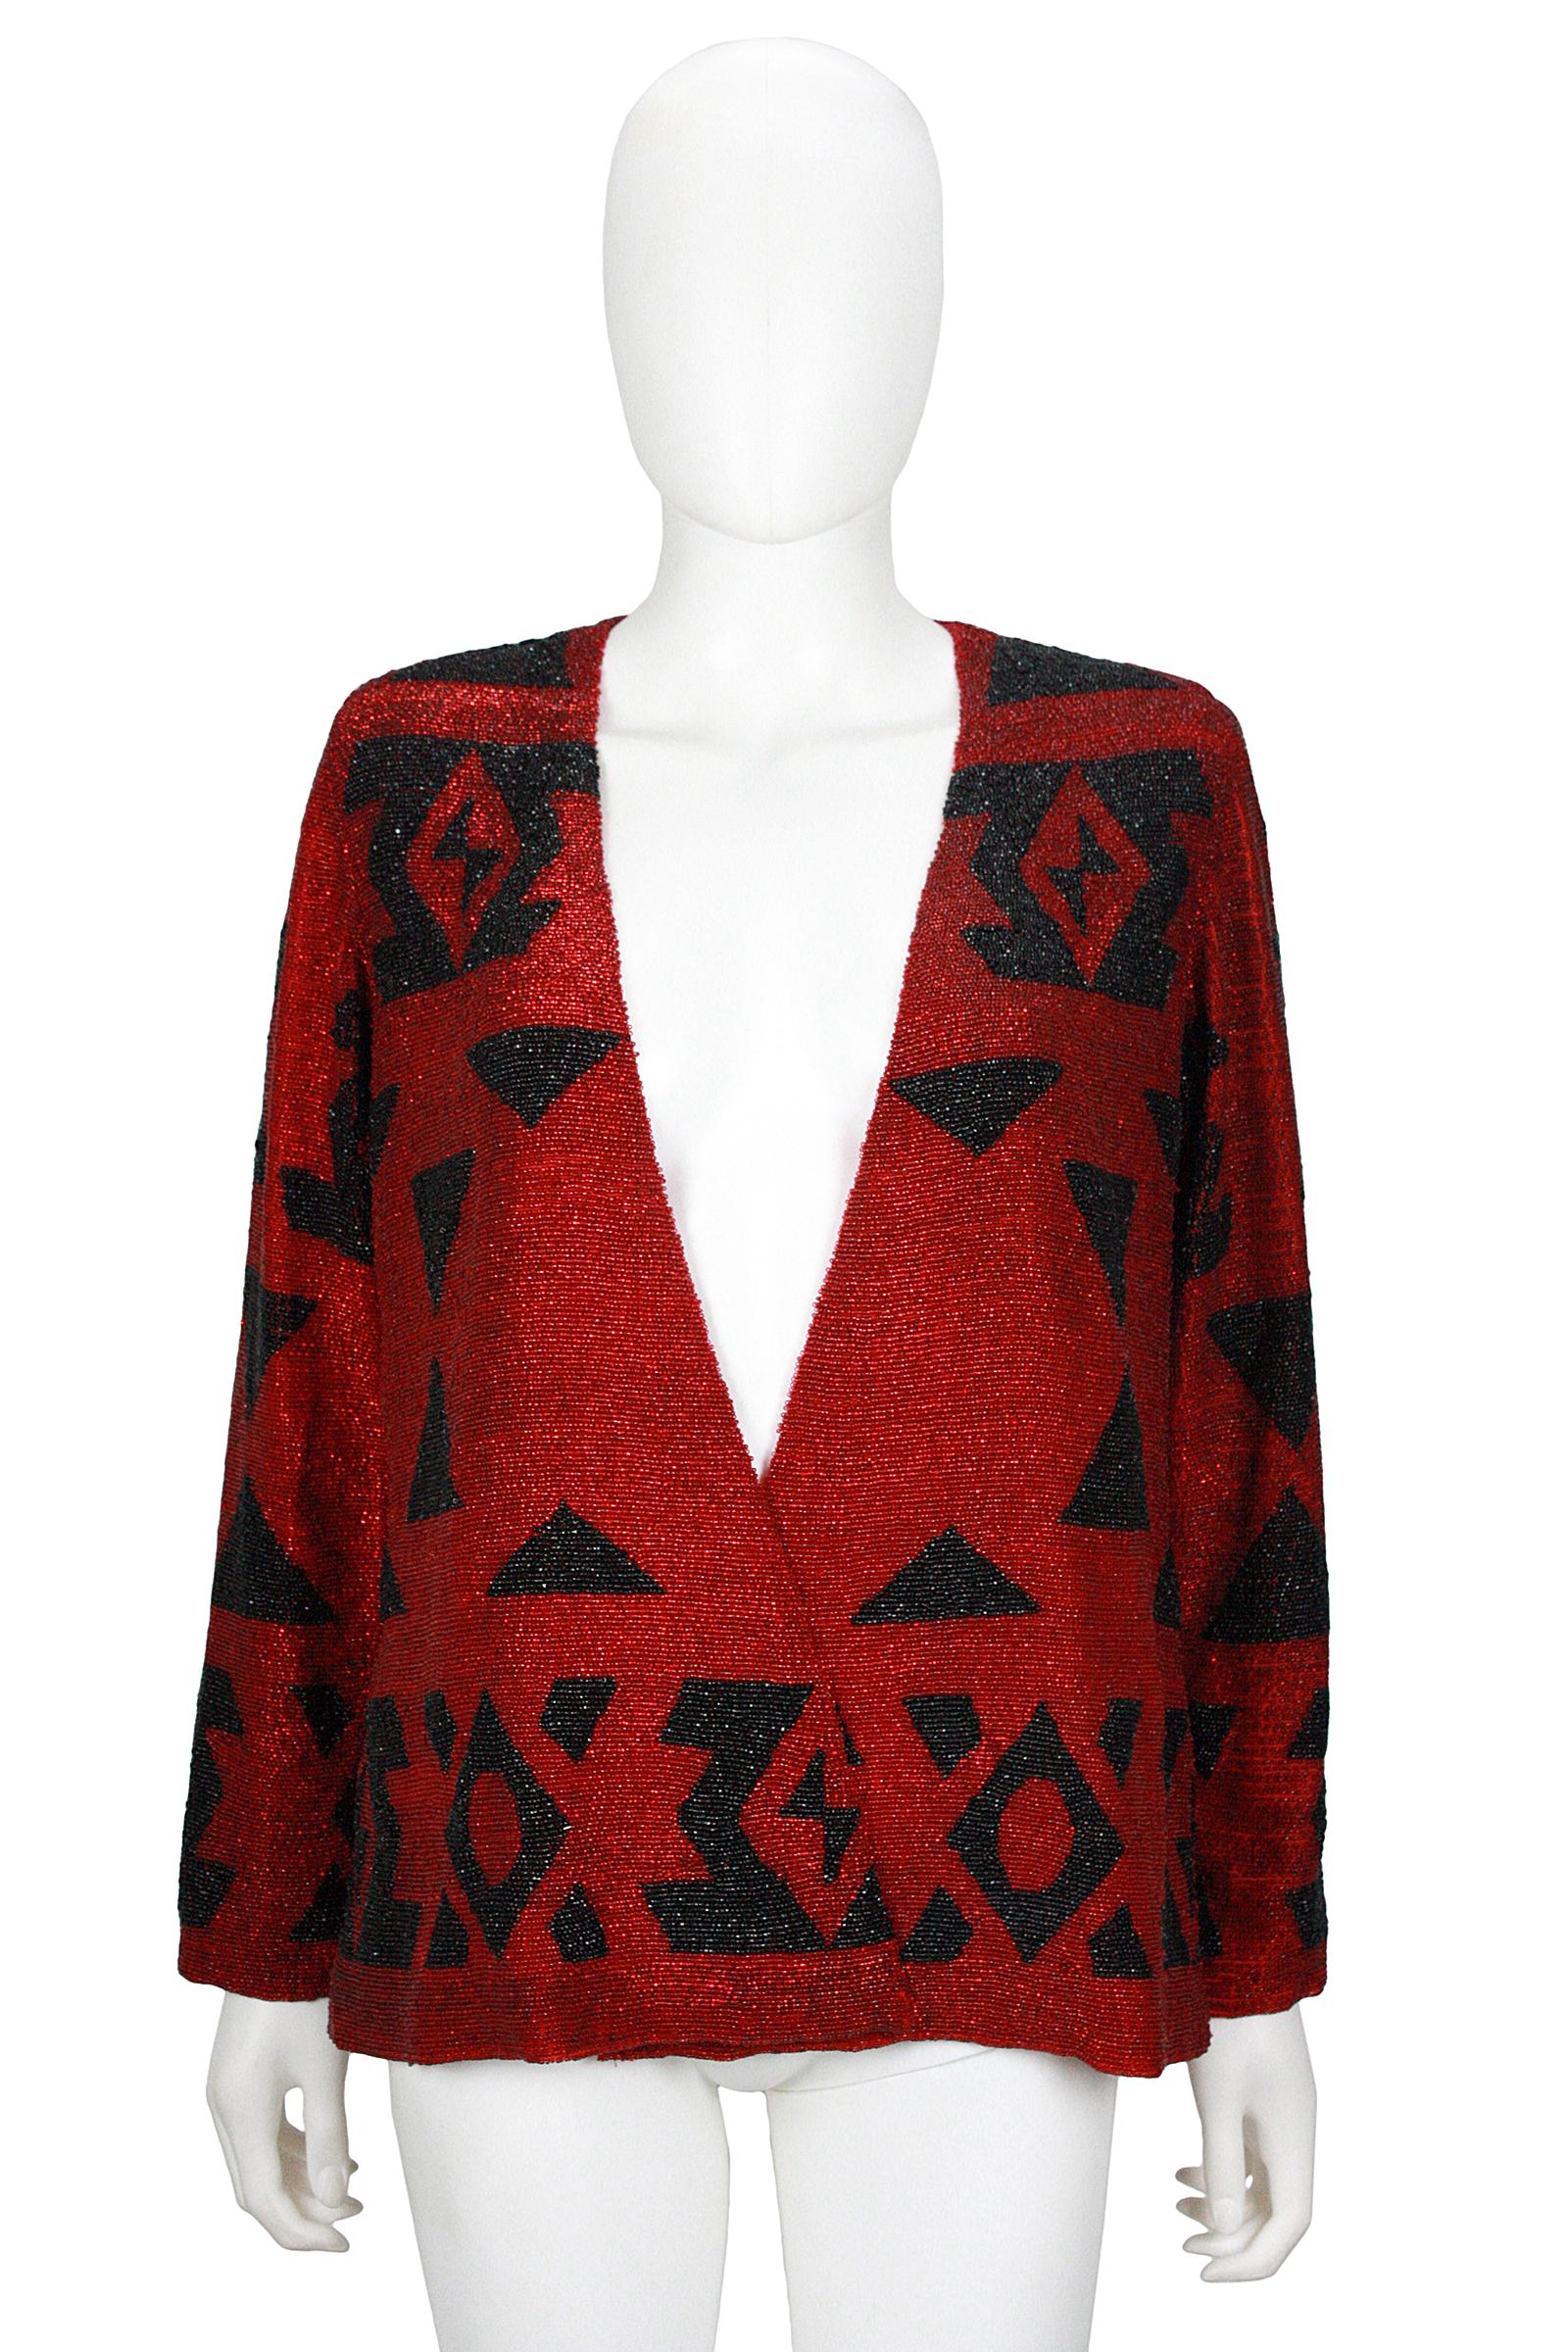 Ralph Lauren 
Red & Black allover beaded
Southwest and Santa Fe inspired pattern
Drape jacket 
No closures
Lightly padded shoulders
Fully lined with silk
I. Magnin garment label included